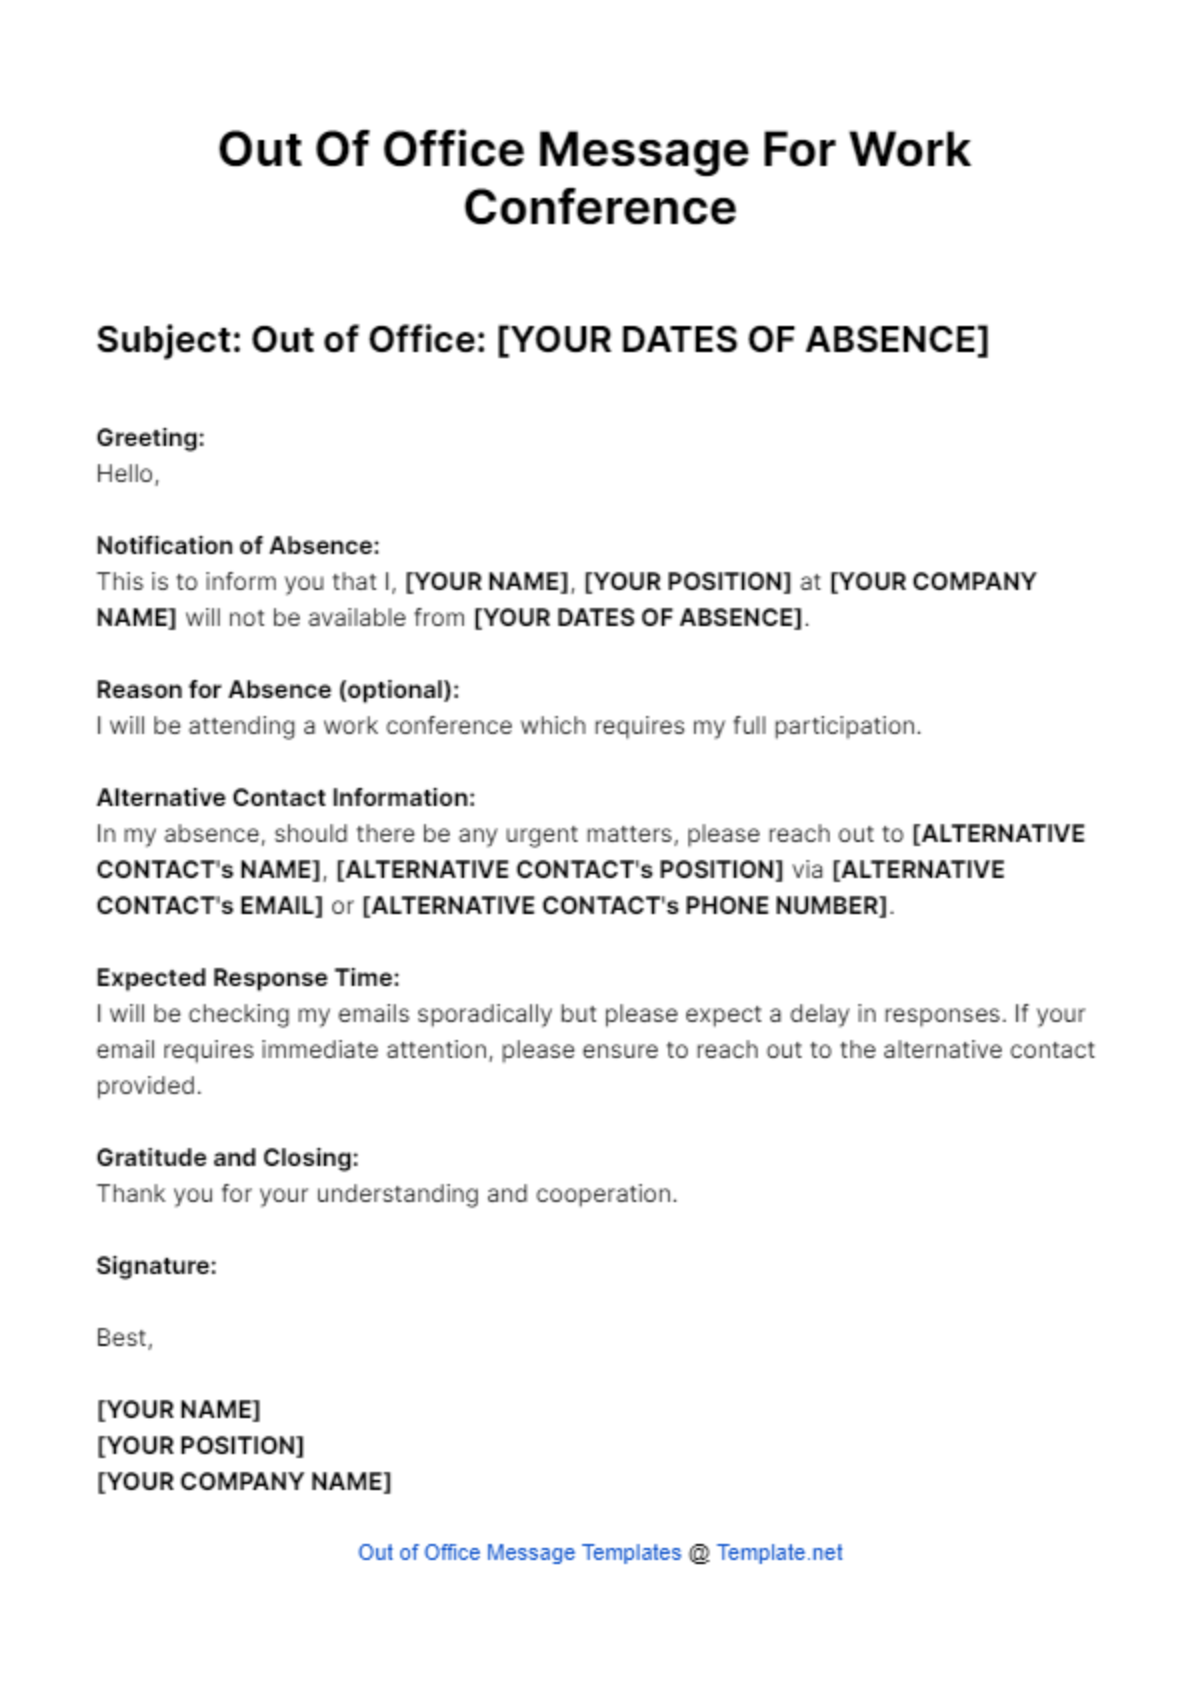 Out Of Office Message For Work Conference Template